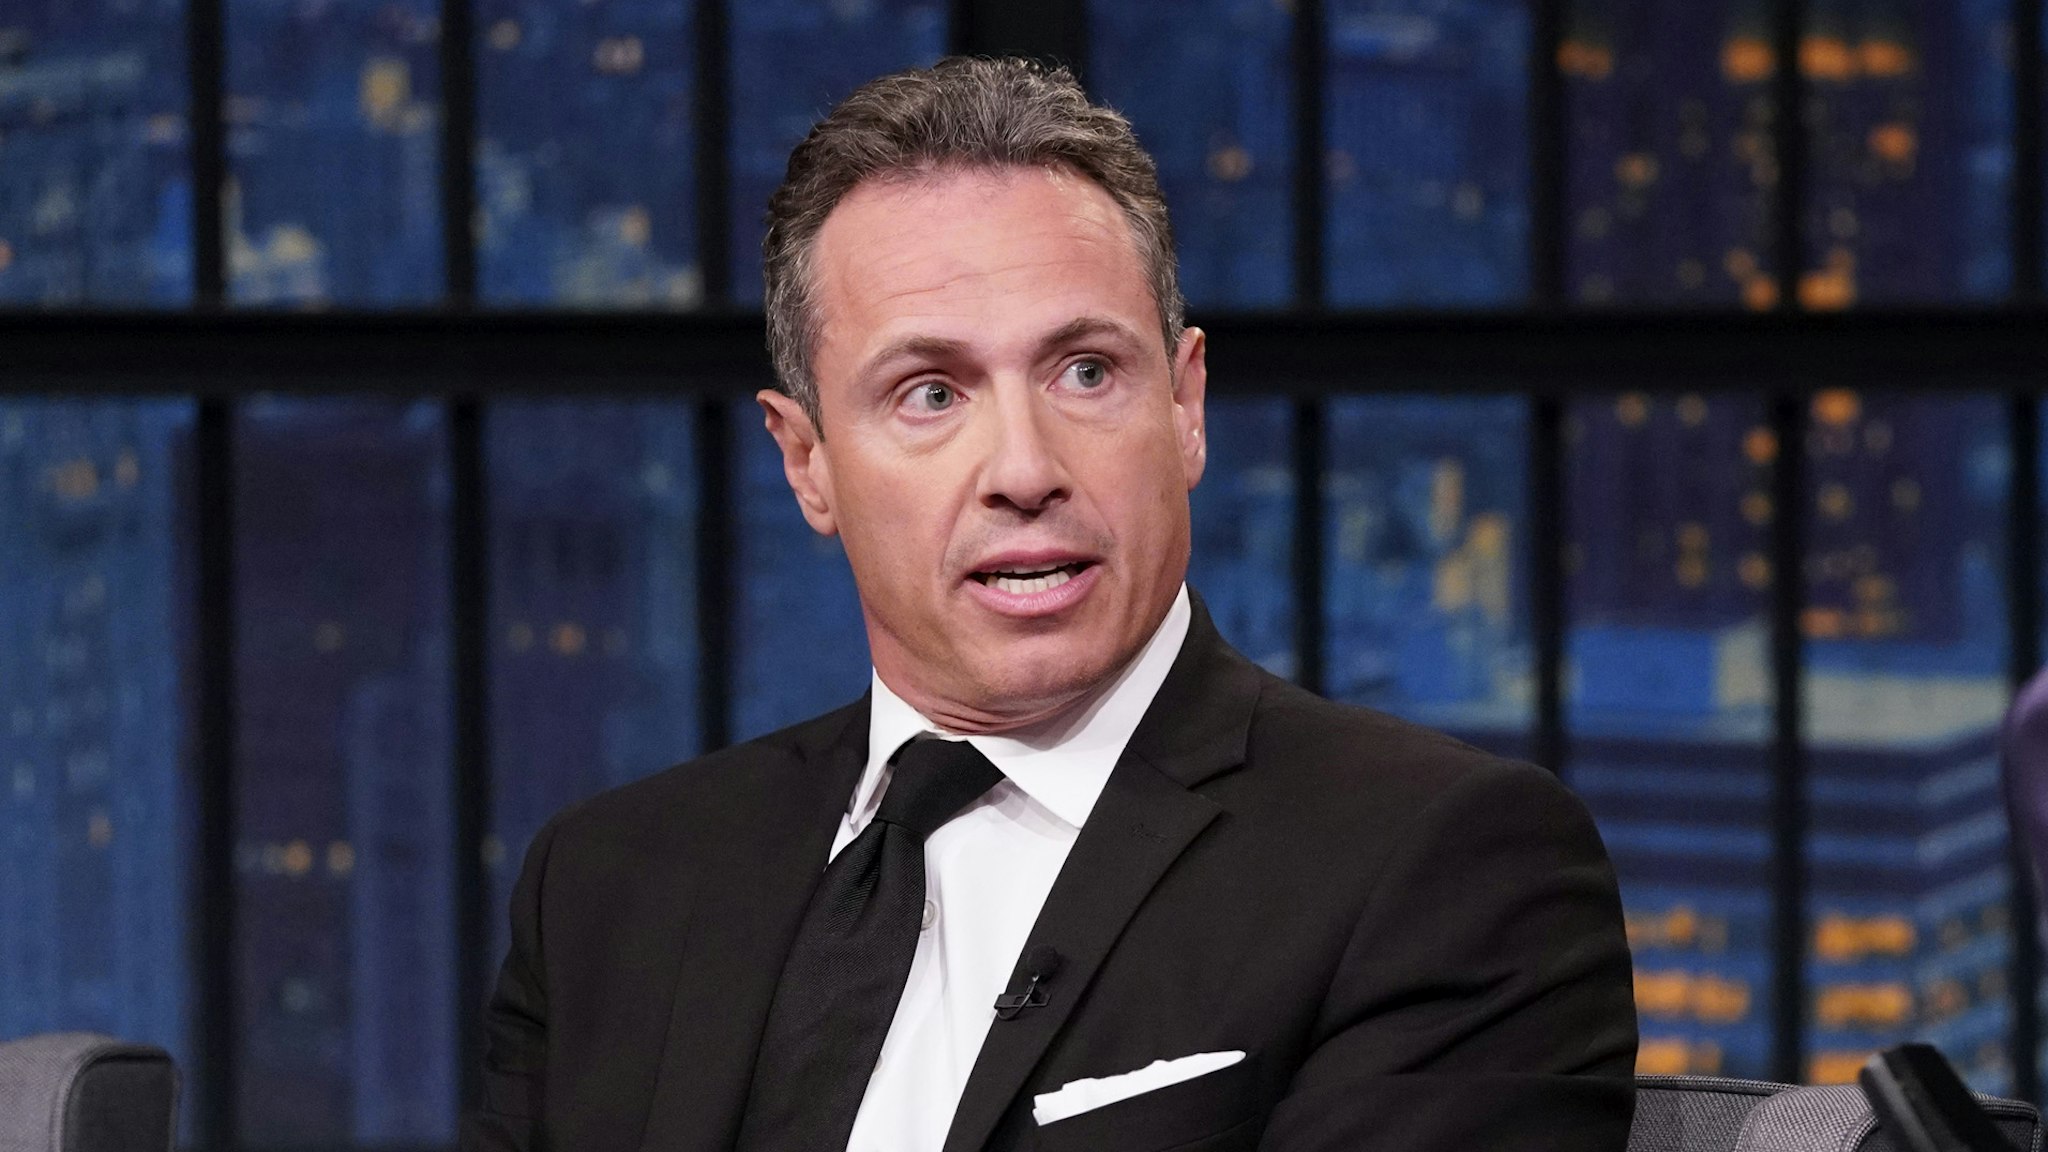 LATE NIGHT WITH SETH MEYERS -- Episode 867 -- Pictured: (l-r) CNN's Chris Cuomo during an interview with host Seth Meyers on August 1, 2019